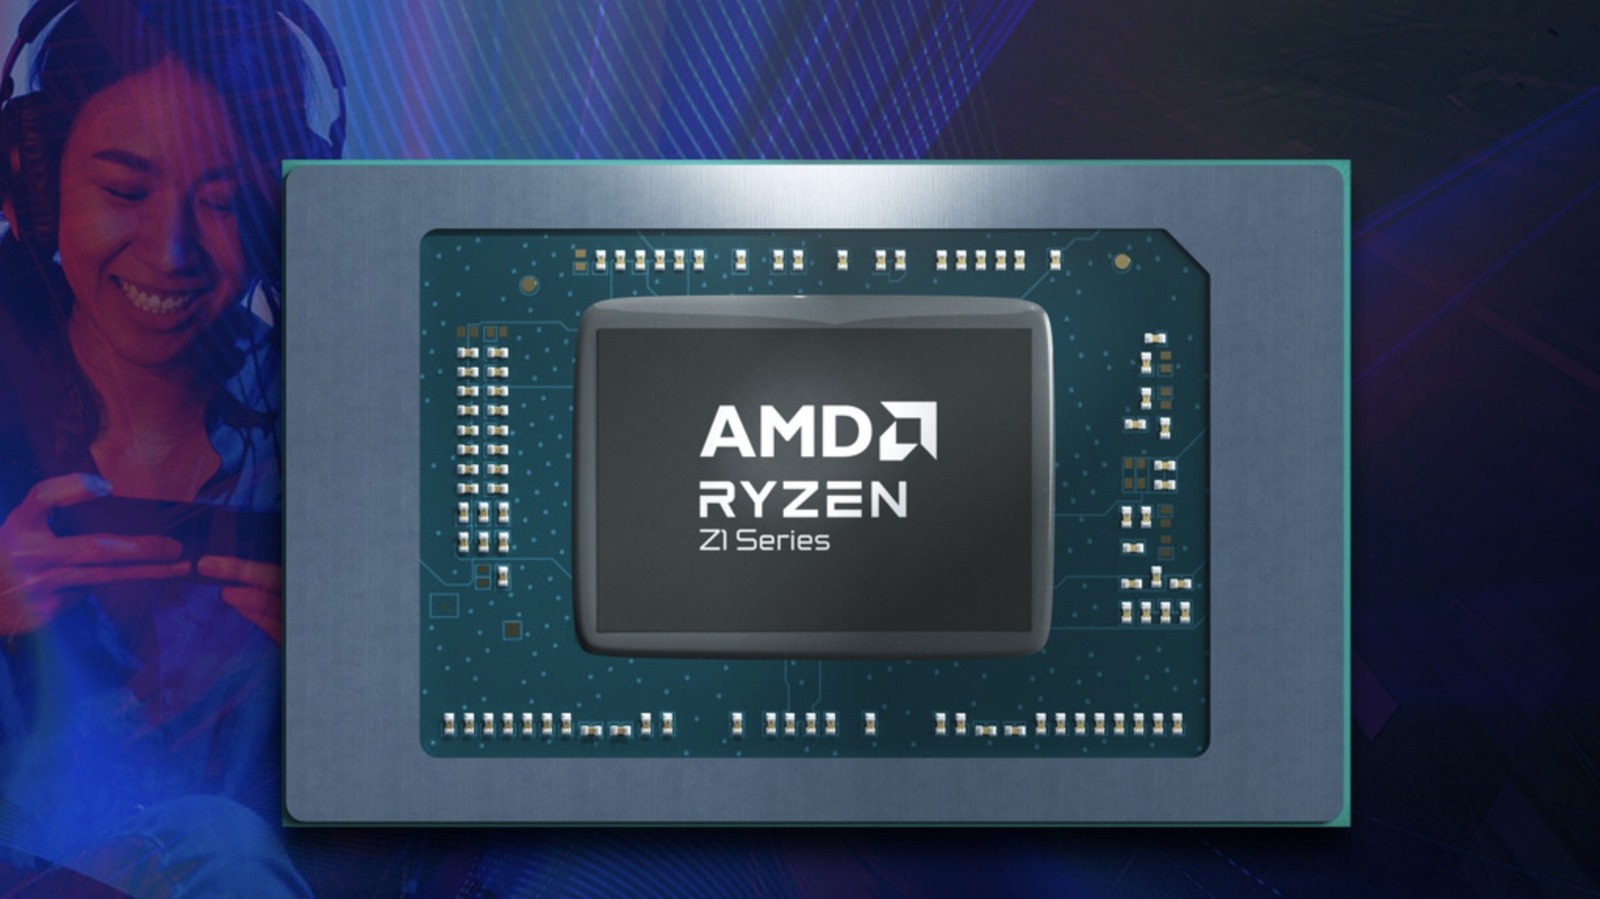 AMD’s New Ryzen Z1 Processors Are Destined For Handheld PC Gaming Devices – SlashGear